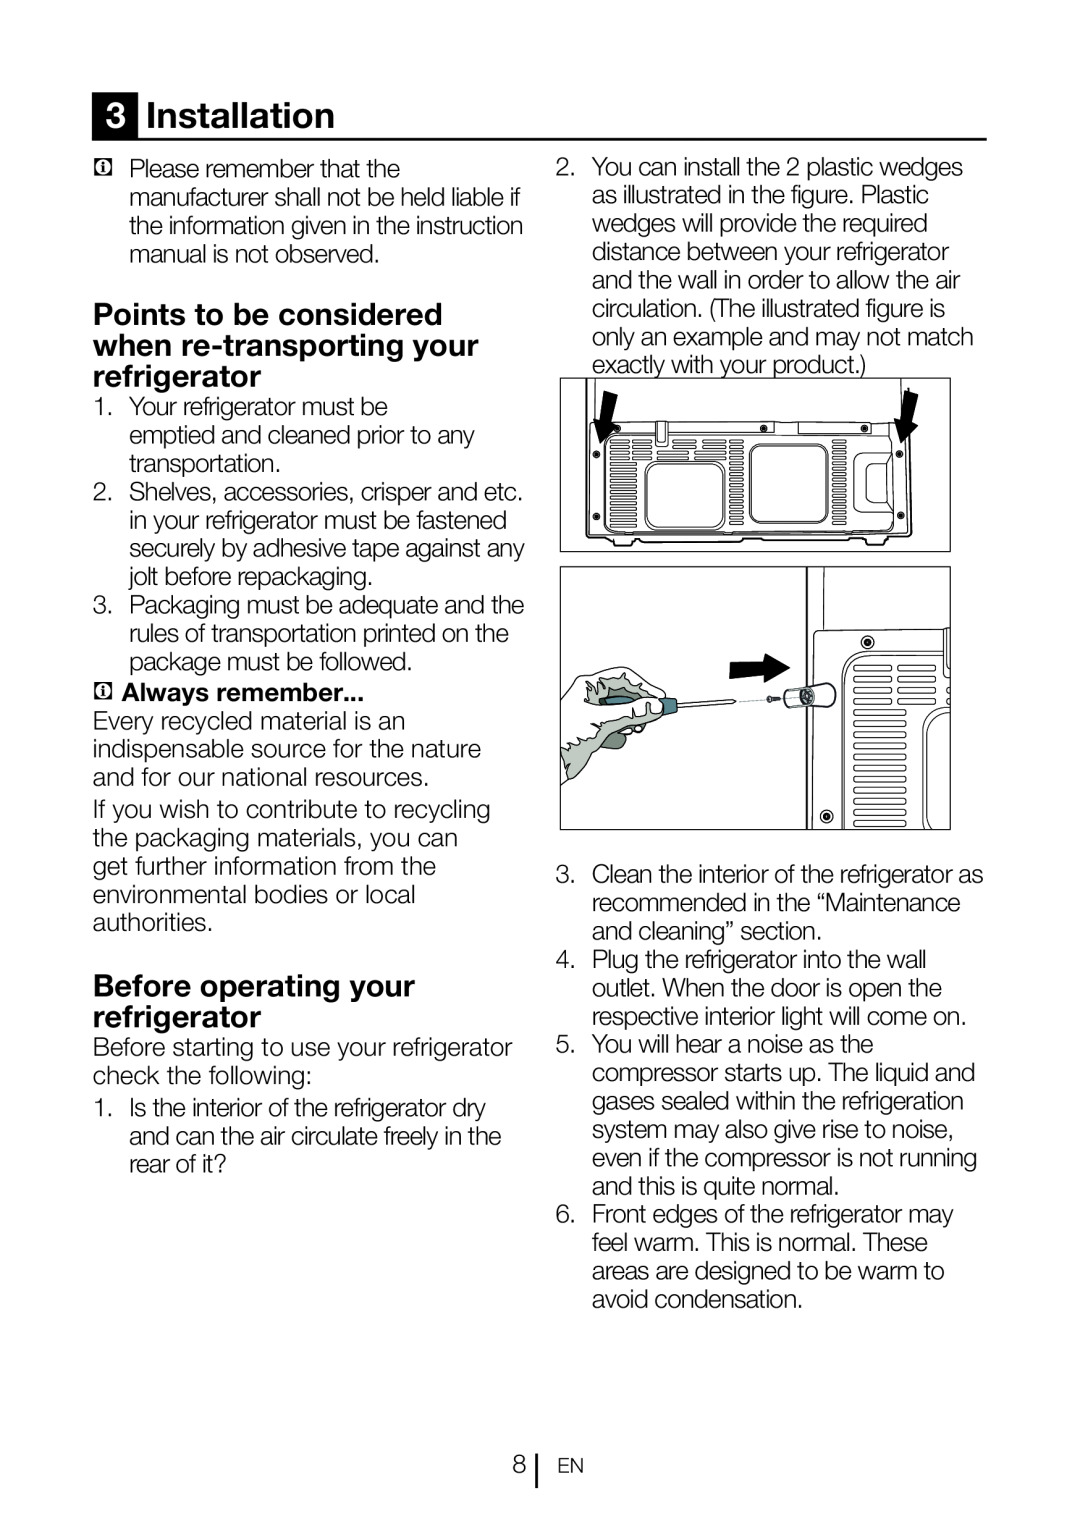 Beko GNE60020X manual Installation, Points to be considered when re-transporting your refrigerator 